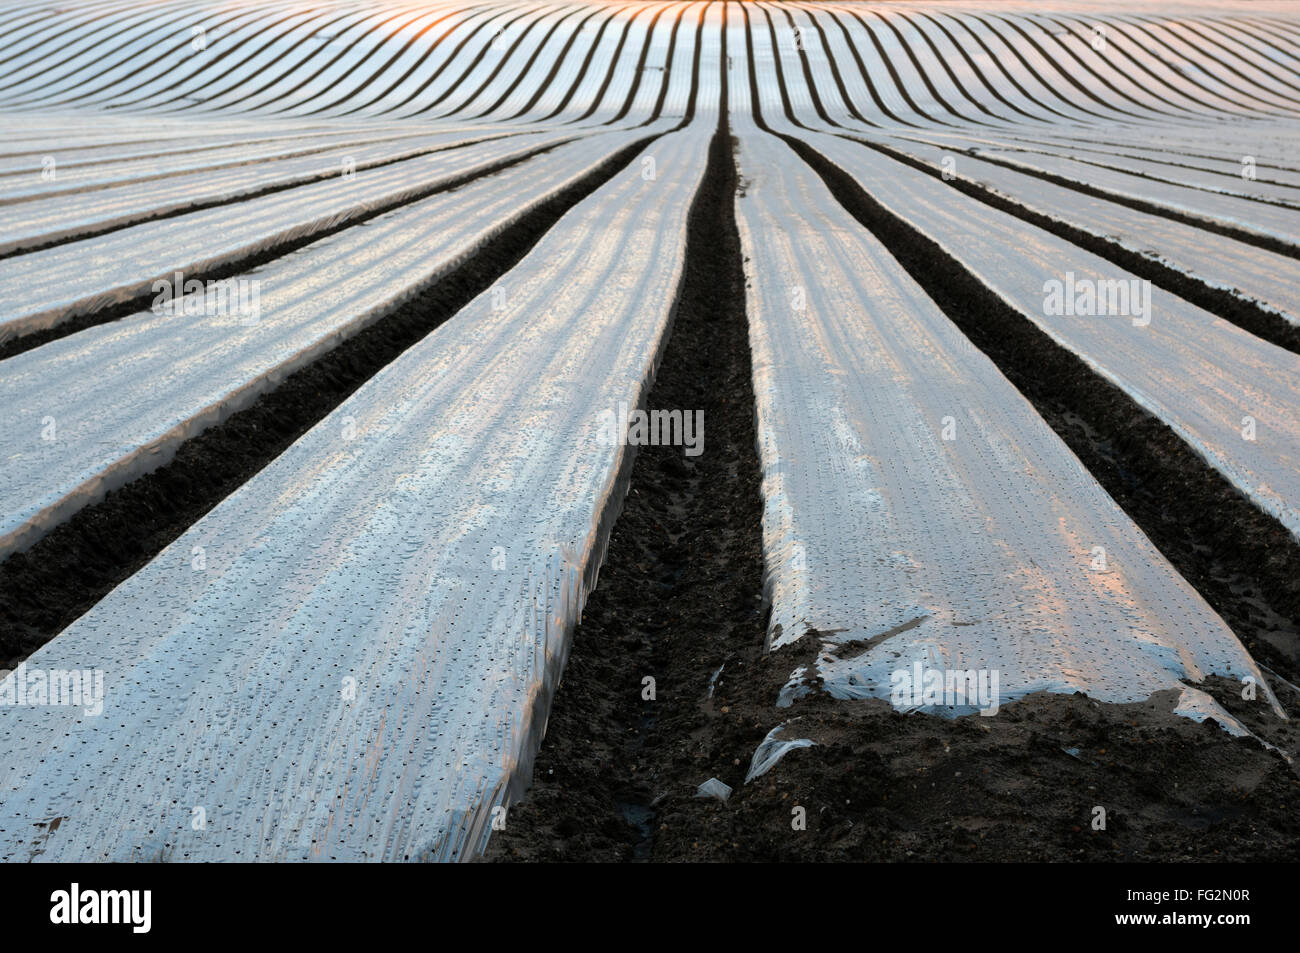 Newly planted carrot crop growing under plastic, Butley, Suffolk, UK. Stock Photo